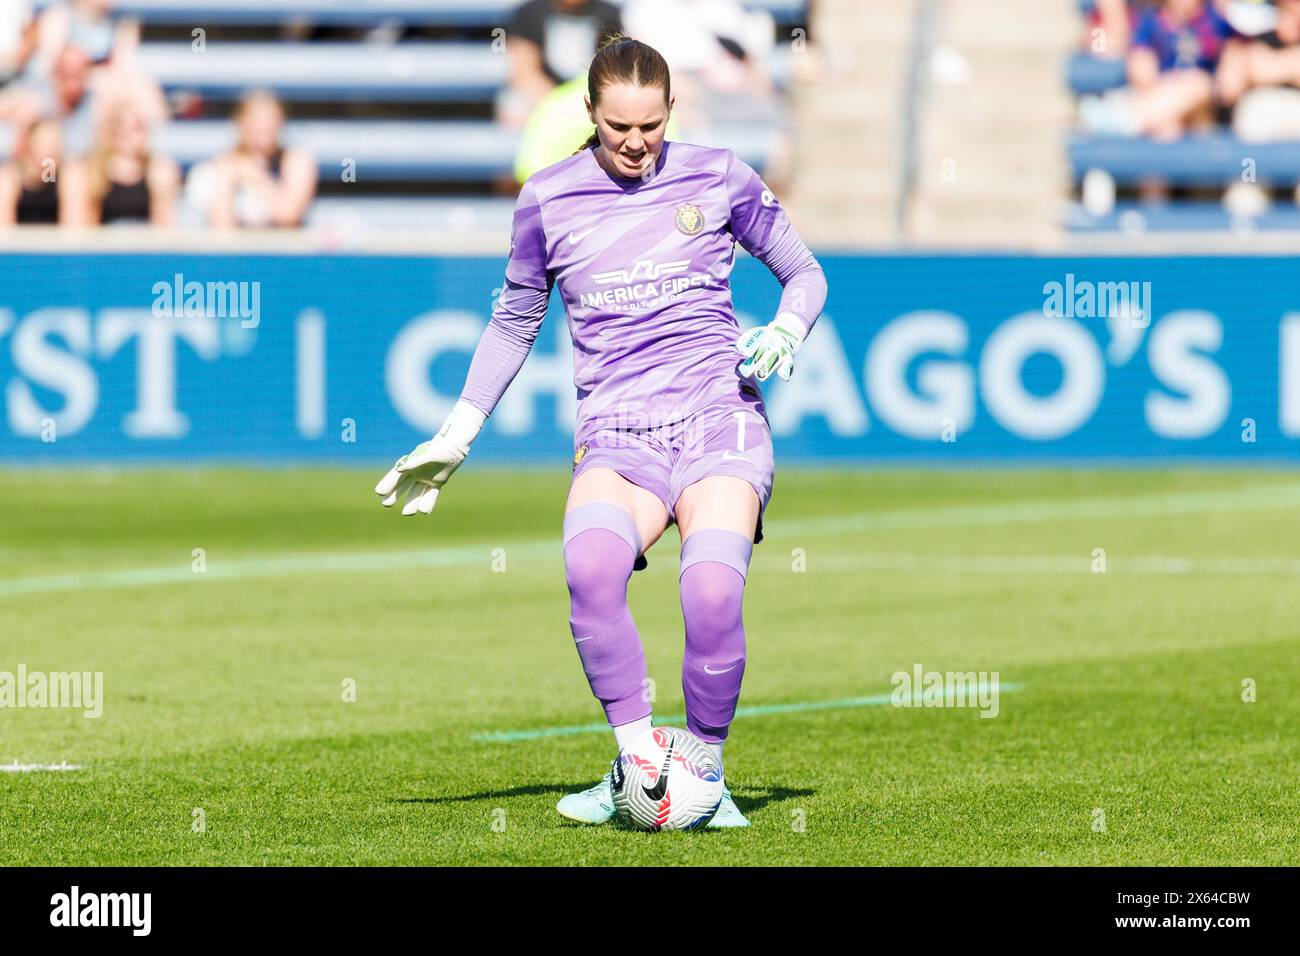 Bridgeview, Illinois, USA. 12th May, 2024. Utah Royals FC goalkeeper Mandy Haught (1) during NWSL Soccer match action between the Utah Royals FC and Chicago Red Stars at SeatGeek Stadium in Bridgeview, Illinois. John Mersits/CSM/Alamy Live News Stock Photo